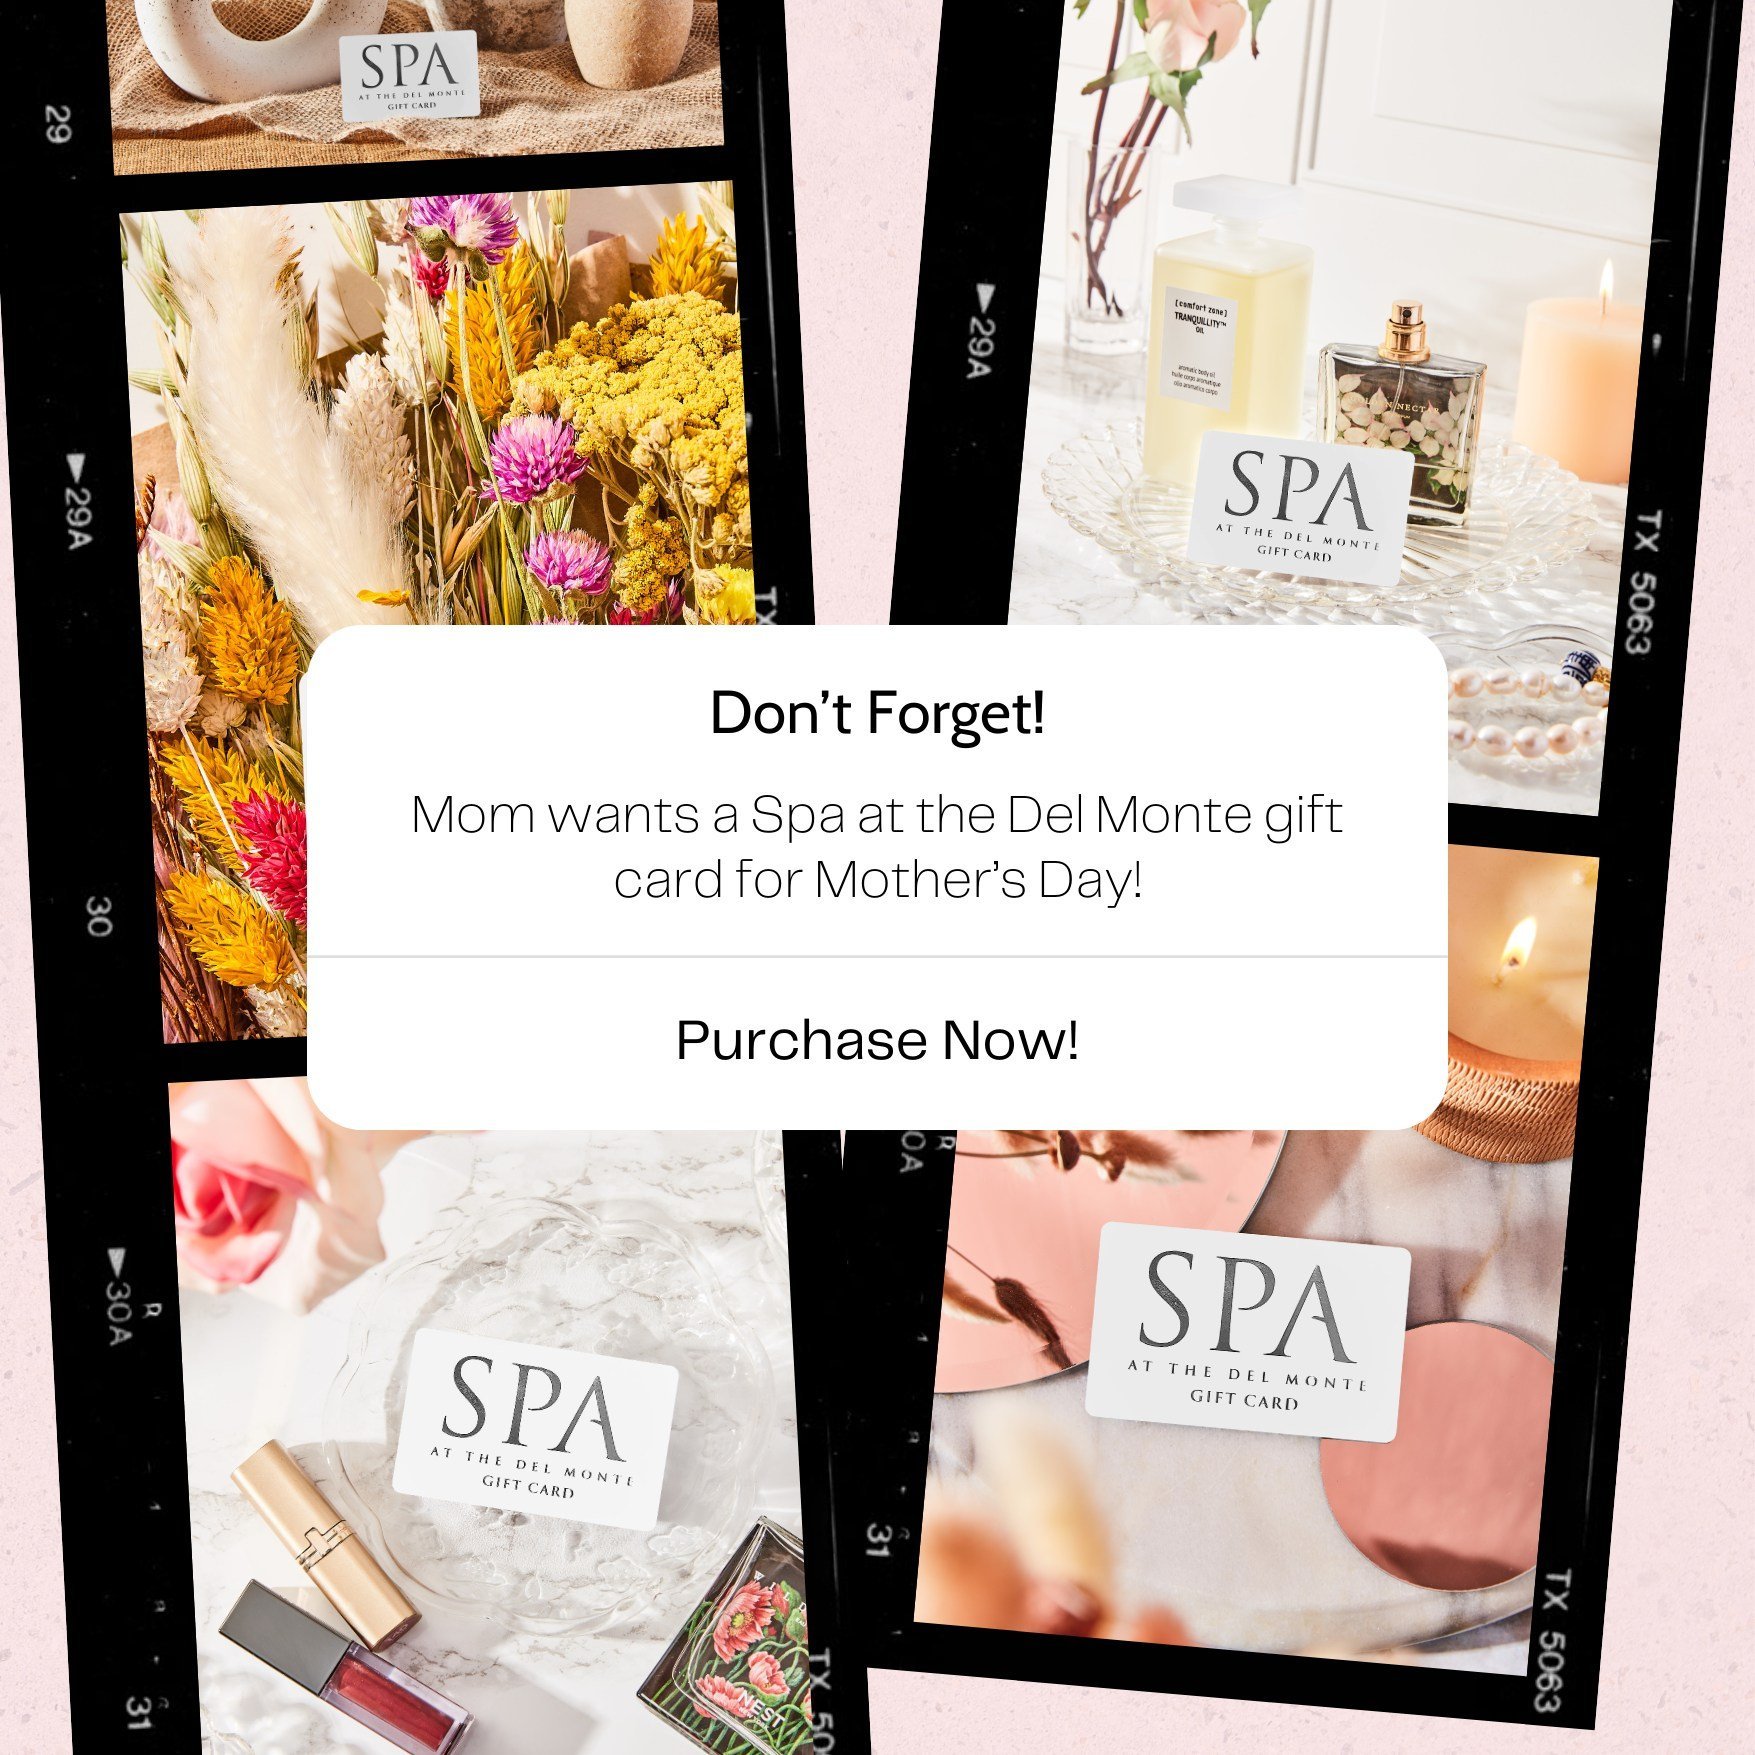 Make this Mother's Day picture perfect with a Spa at the Del Monte gift card 💌
.
.
.
#delmontespa #skinhealth #spalife #spalife #spa #dayspa #pittsford #skincare #shoplocal #treatyourself #pittsfordny #rochesterny #selfcare #spaday #locallyowned #sh